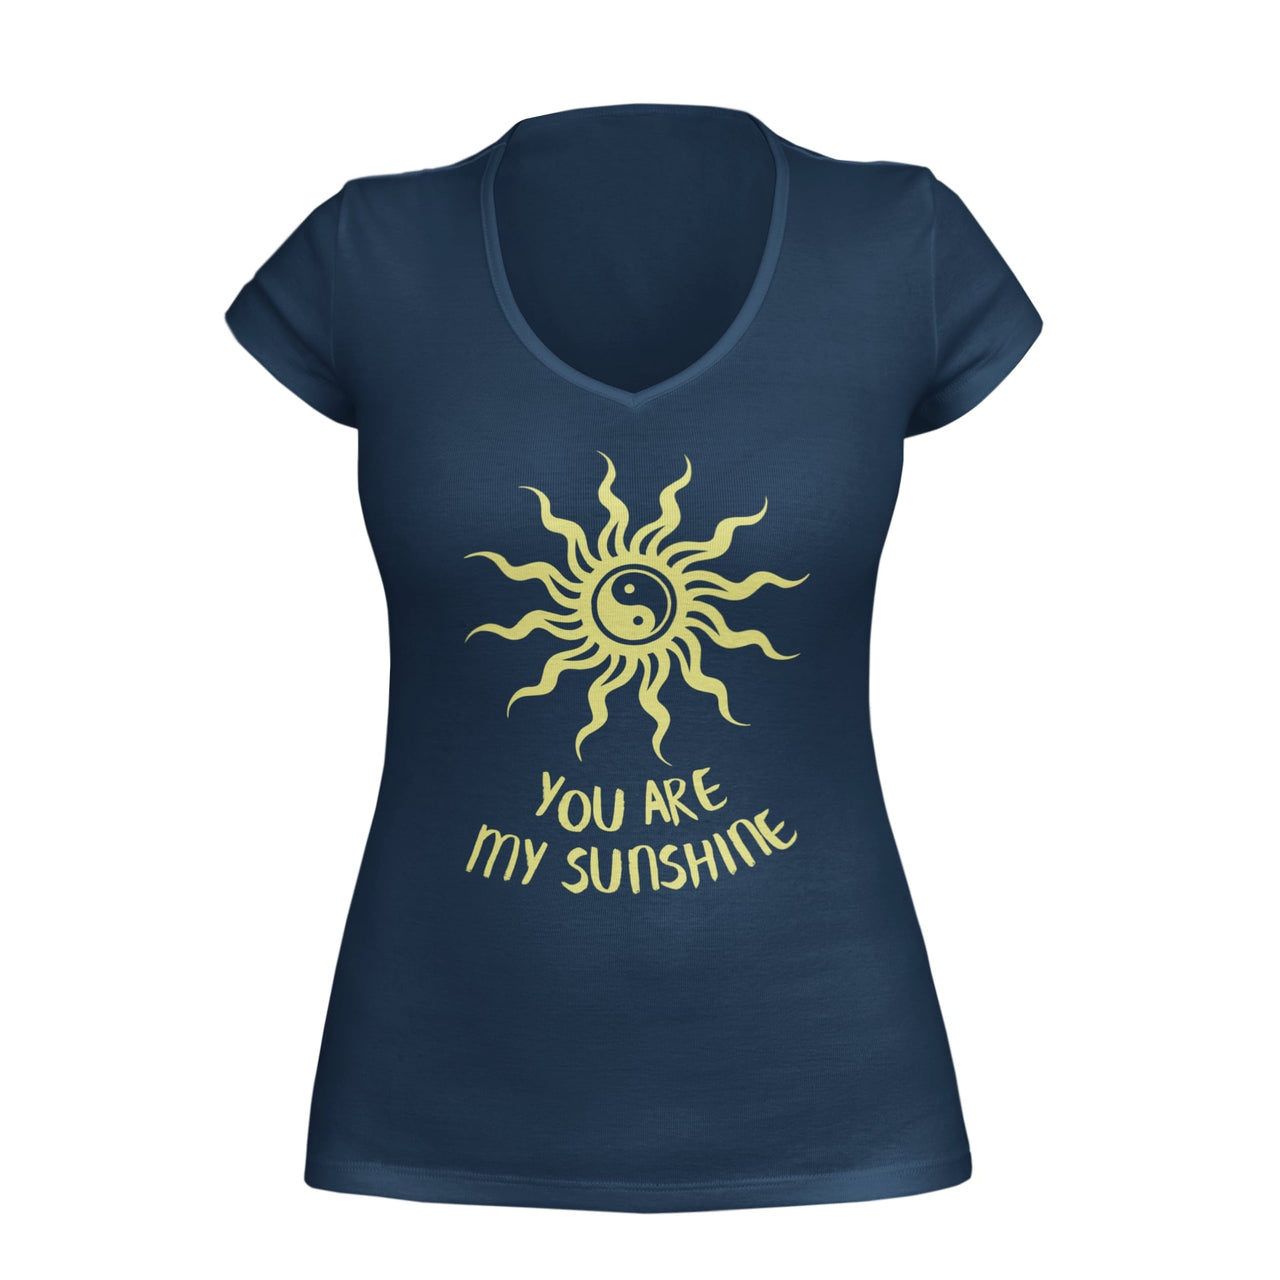 Navy Womens VNeck featuring a Yin Yang sun with bold rays and the text 'You are my sunshine', designed by WooHoo Apparel.